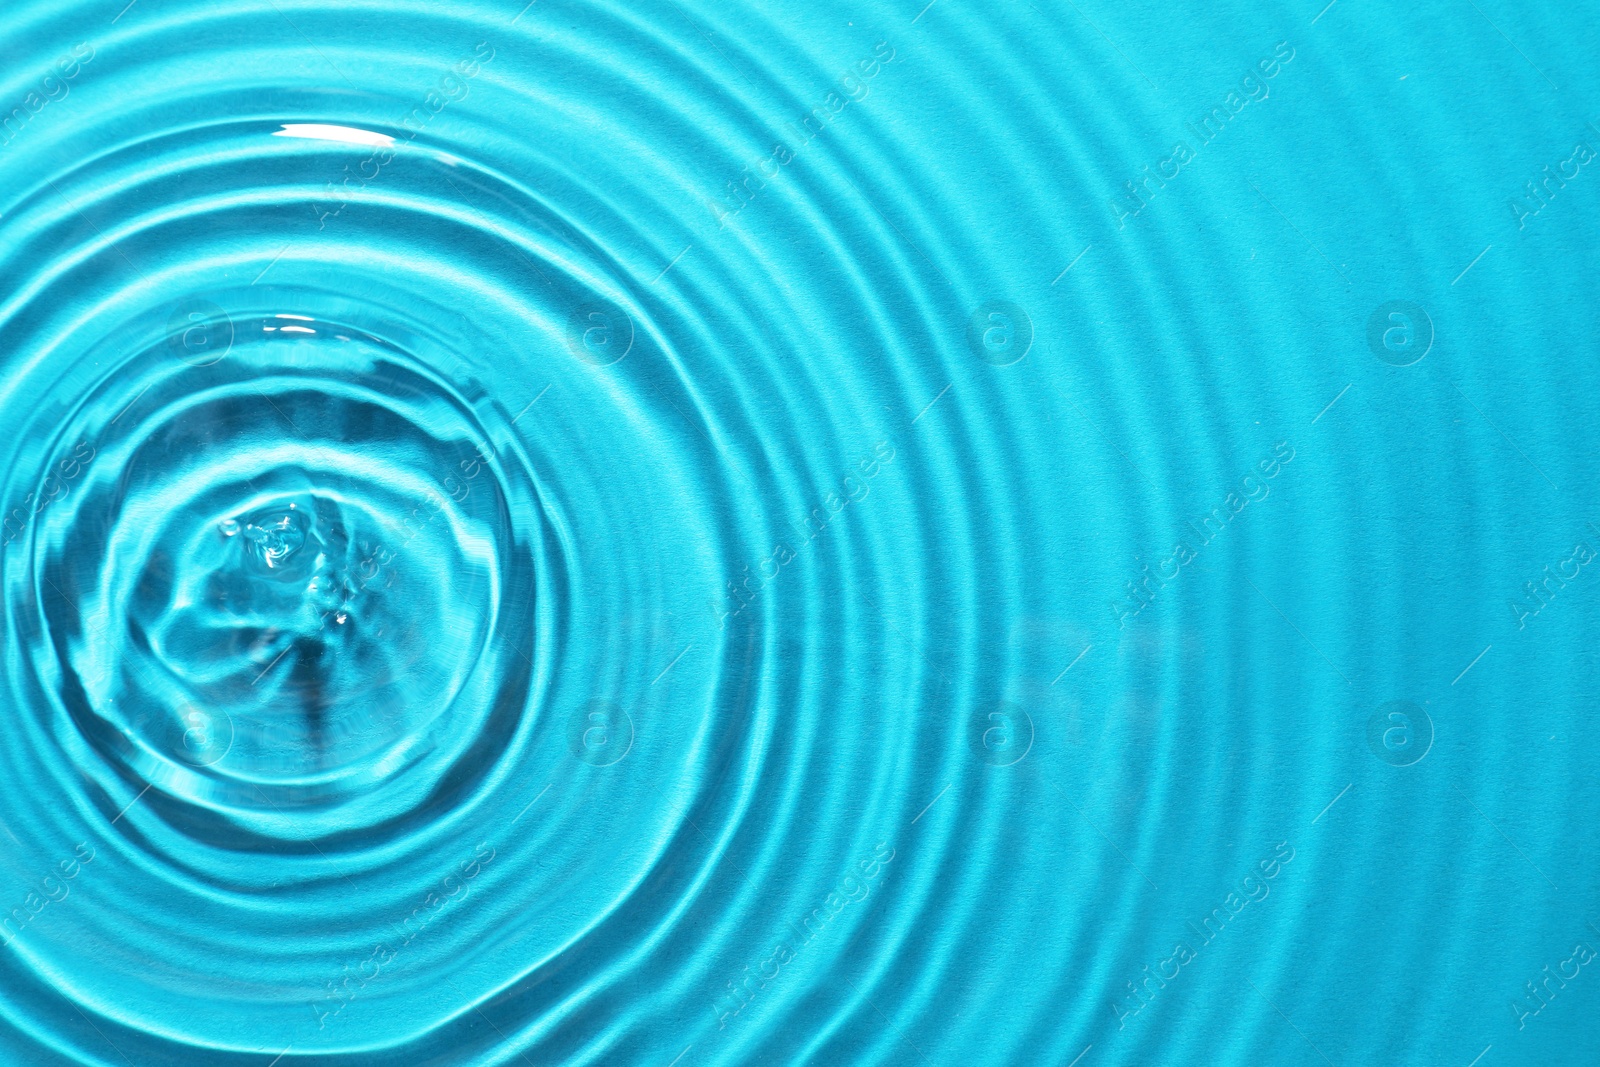 Image of Rippled surface of clear water on light blue background, top view